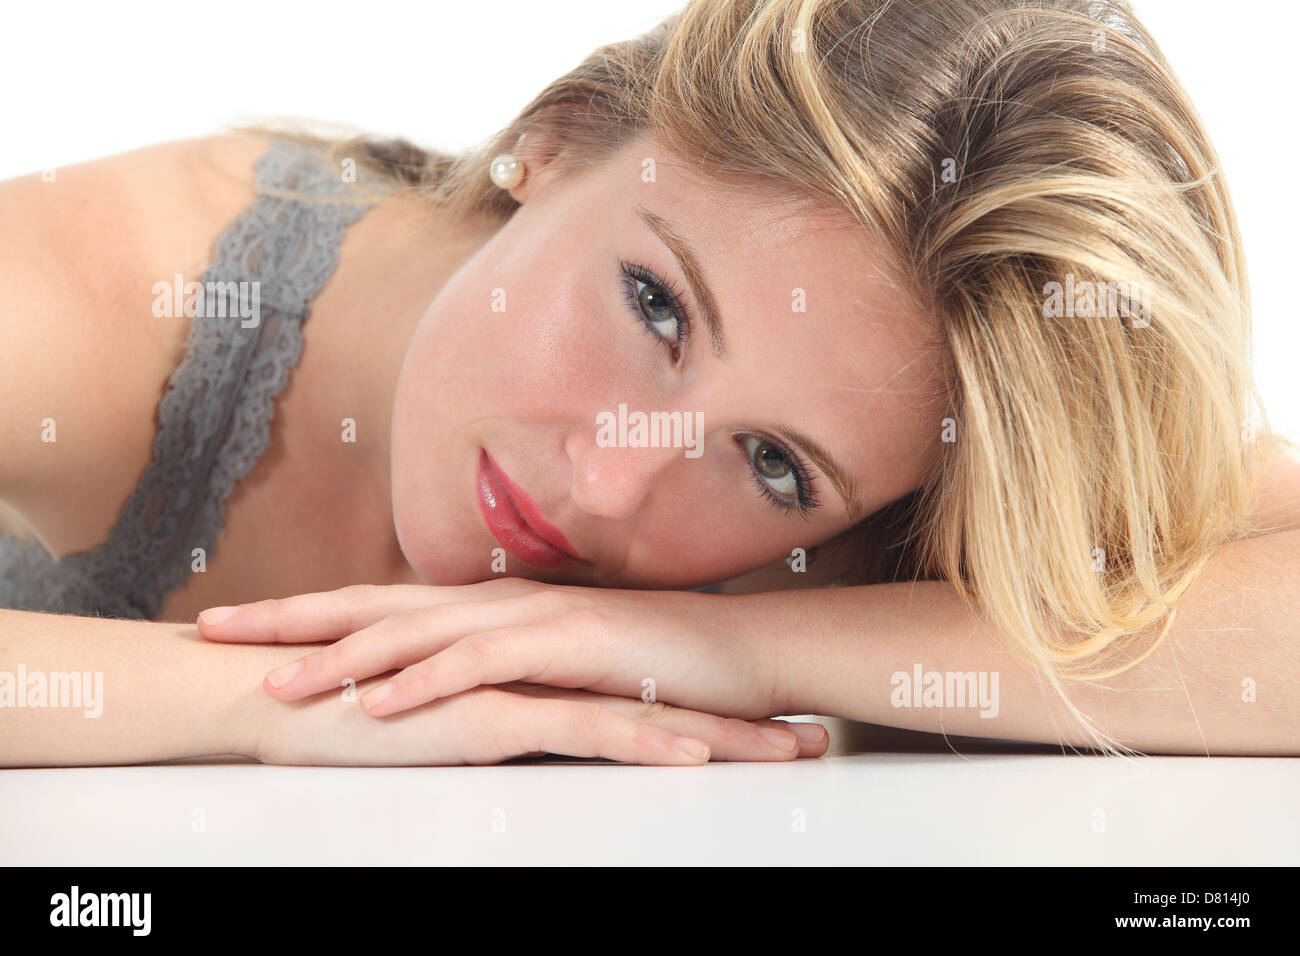 Portrait of a beautiful woman face isolated on a white background Stock Photo